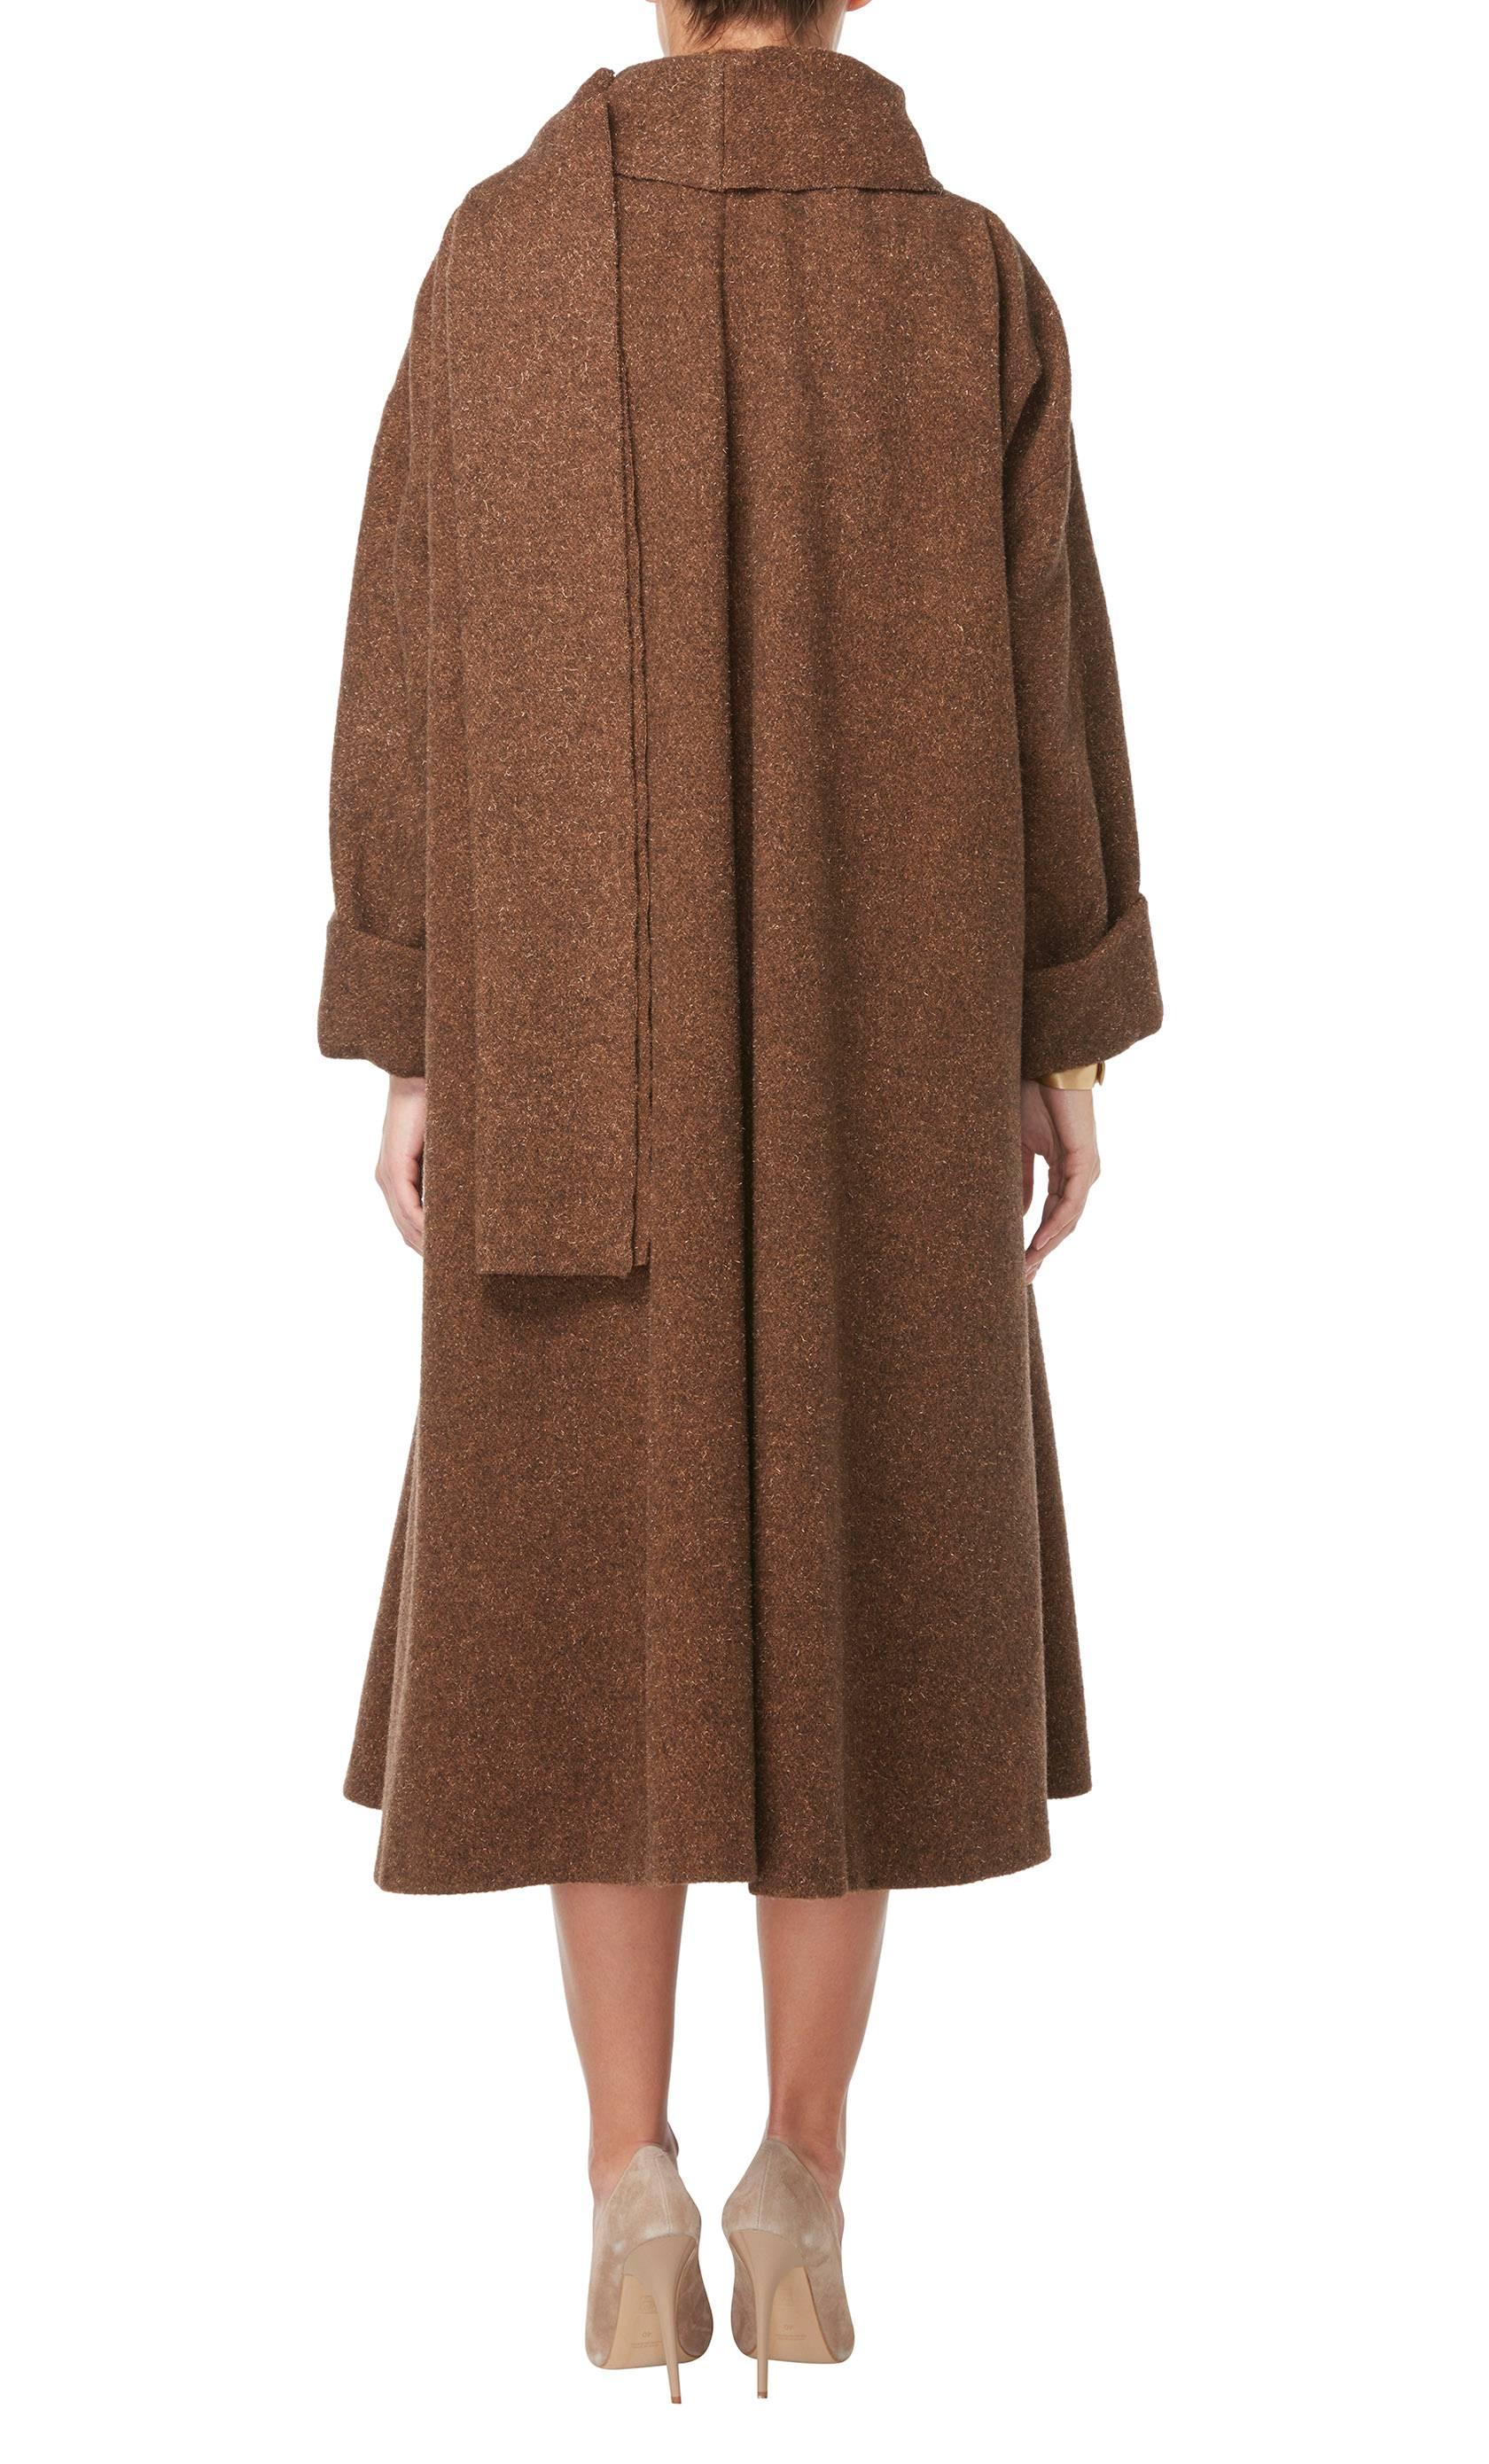 Guy Laroche haute couture brown skirt suit, circa 1957 In Excellent Condition For Sale In London, GB